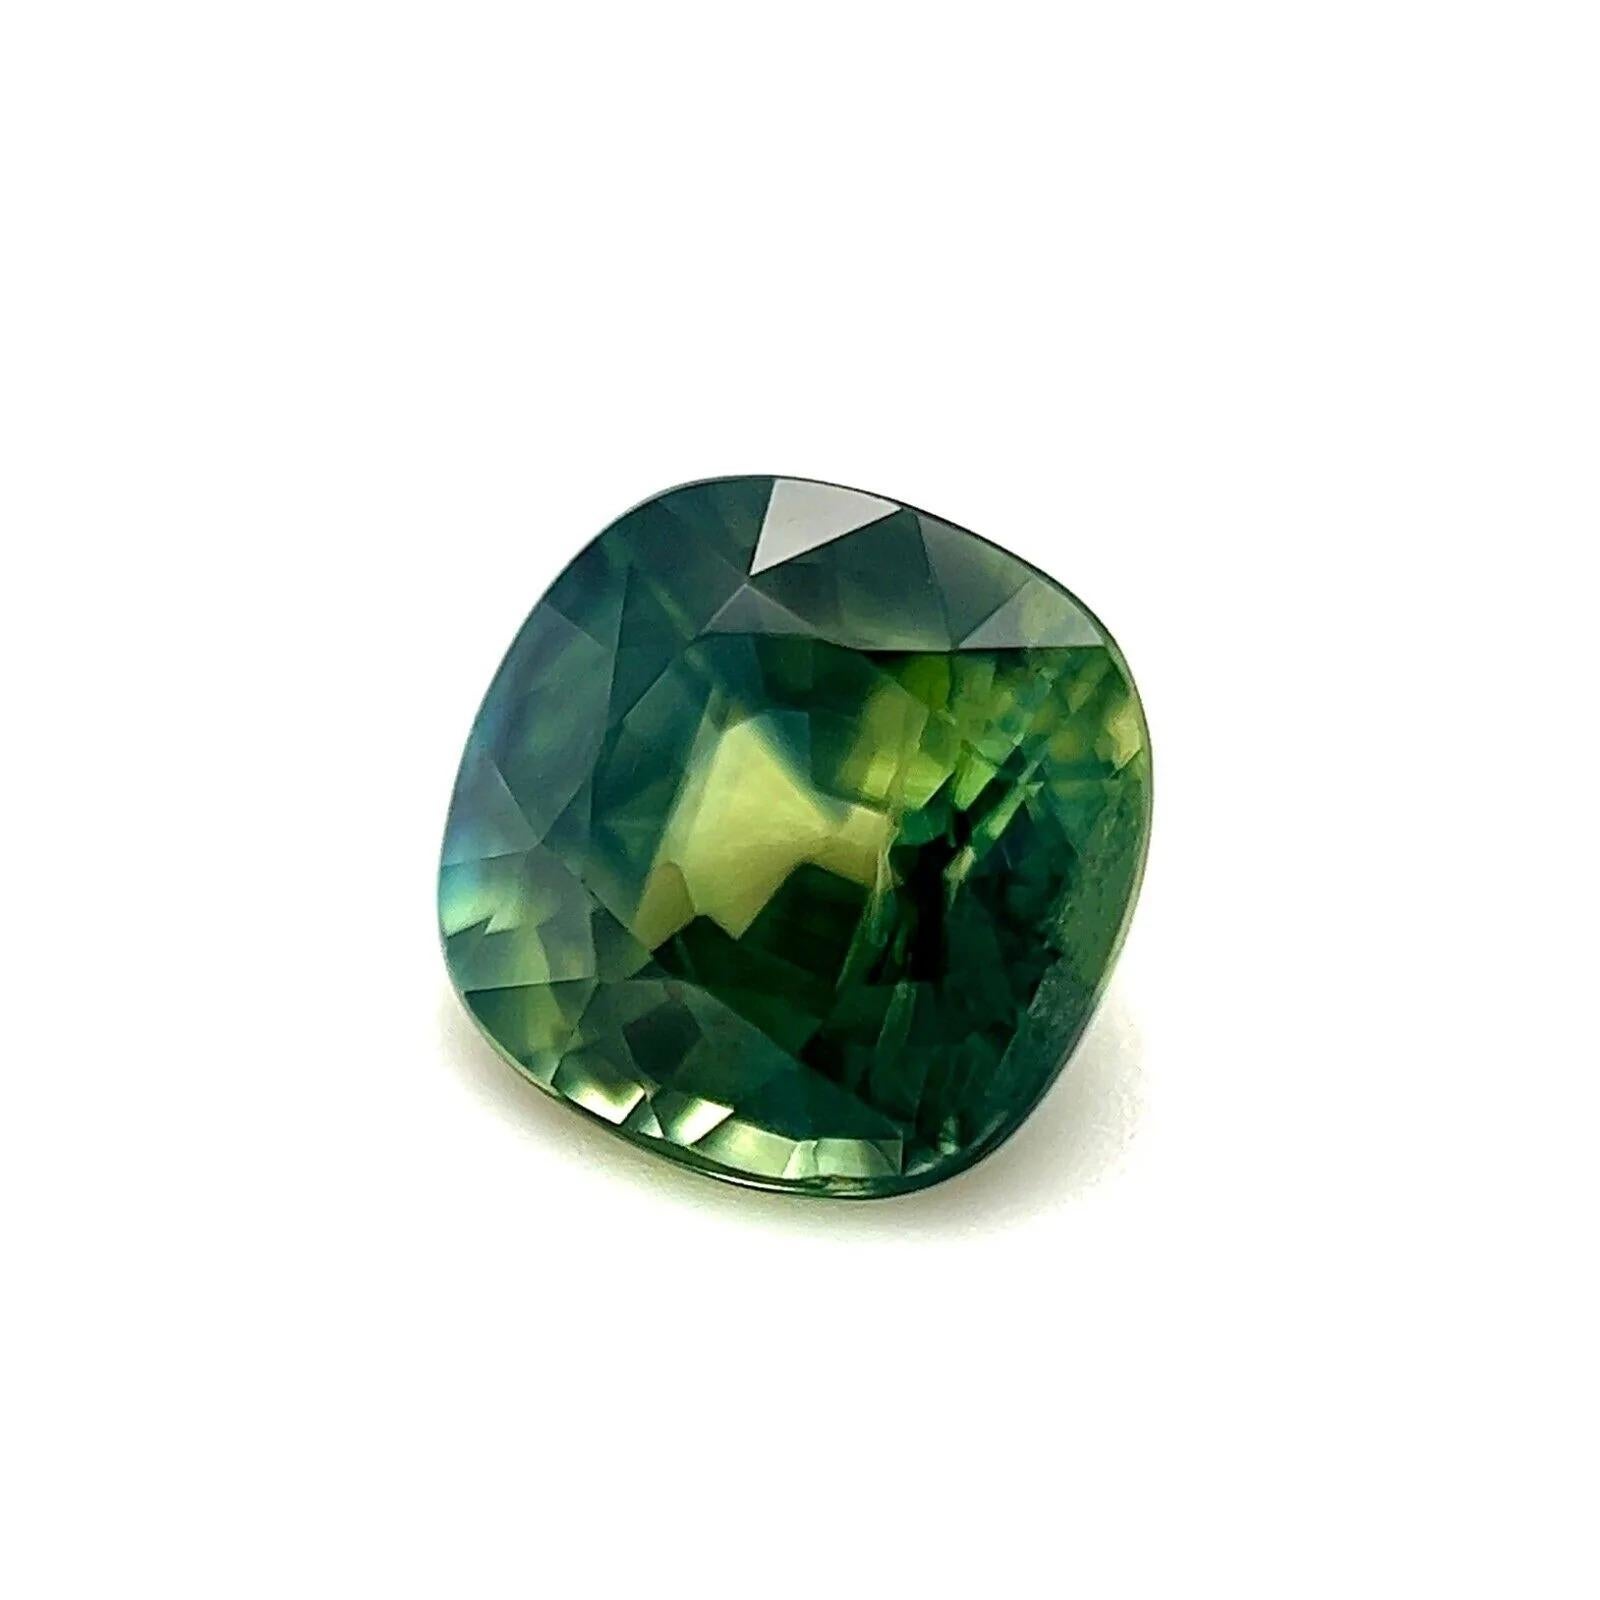 1.33ct Parti Colour Australia Sapphire Blue Green Yellow Cushion Cut Gem 6x6mm

Natural Australian Greenish Yellow Blue Parti-Colour Sapphire Gemstone.
1.33 Carat with a beautiful and unique greenish yellow blue colour and very good clarity, a very